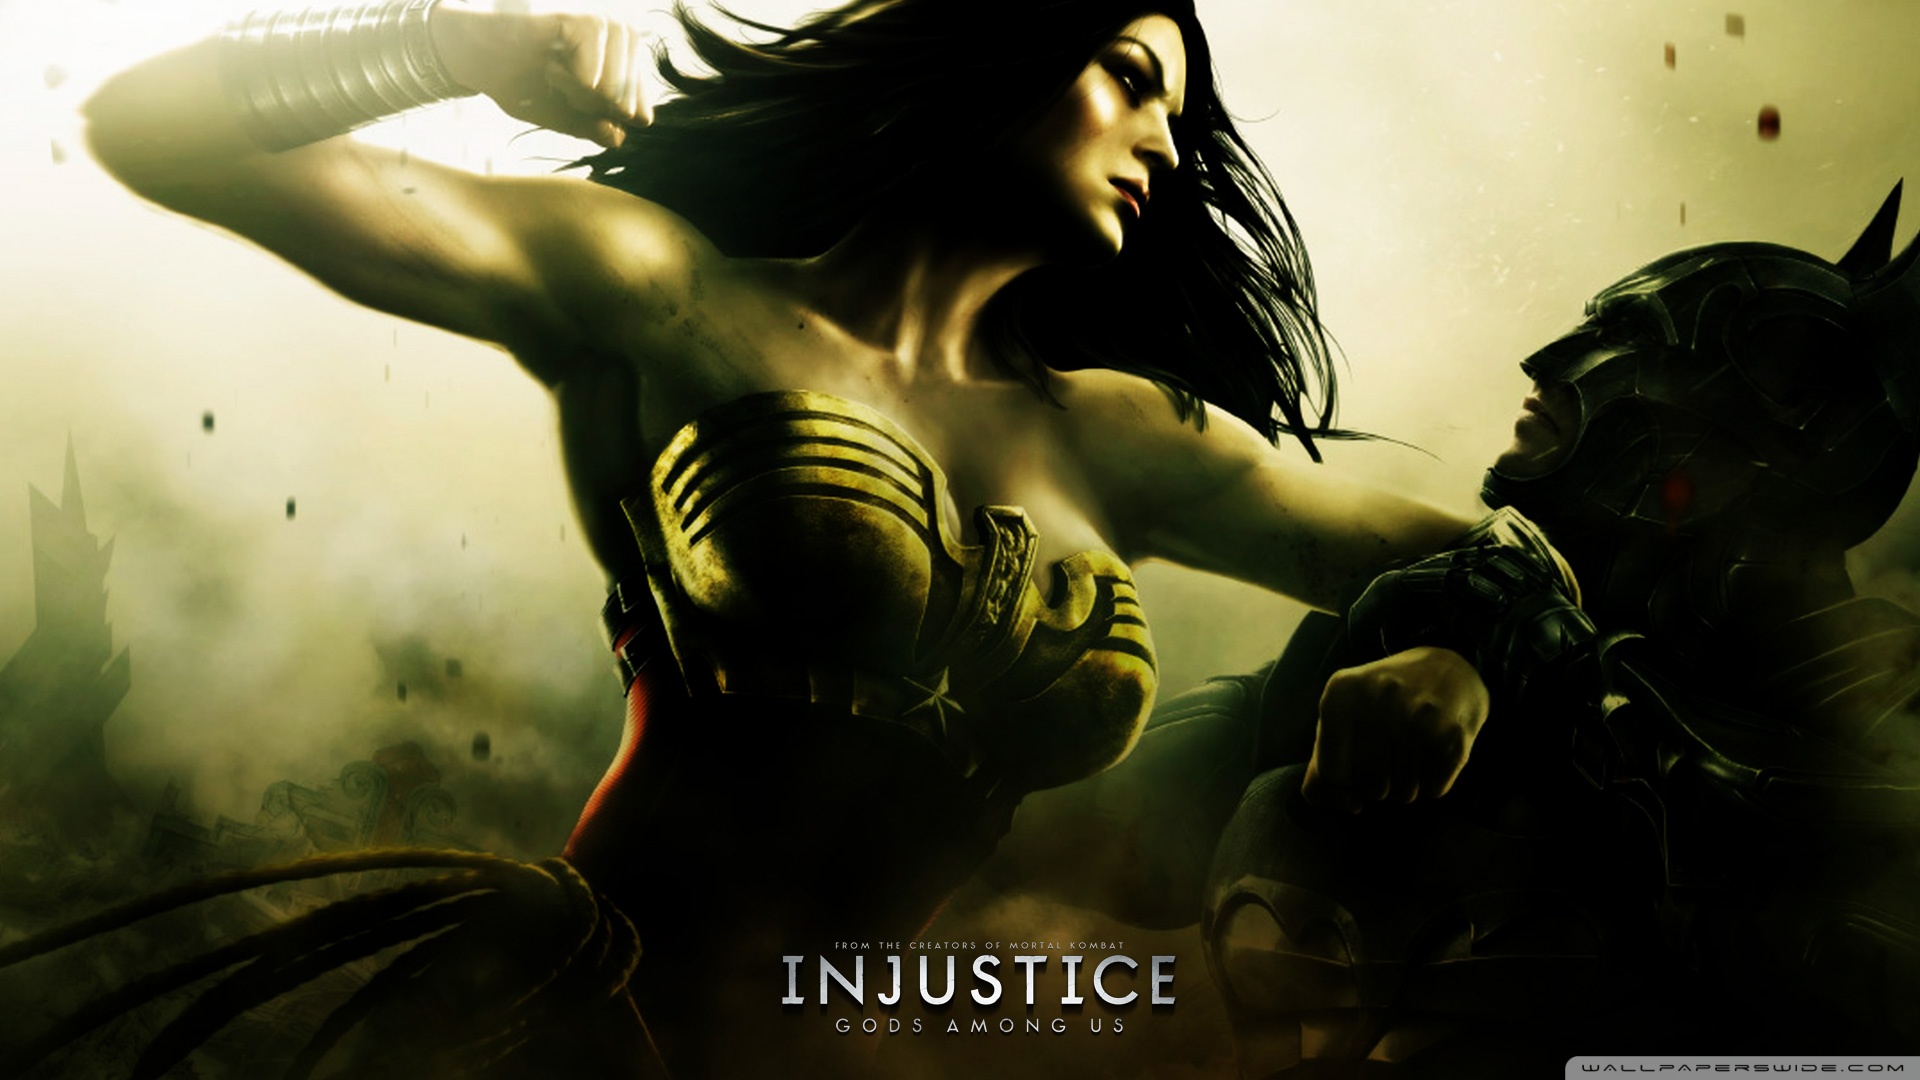 Of Beautifull Wonder Woman Wallpaper For Your Puter Background